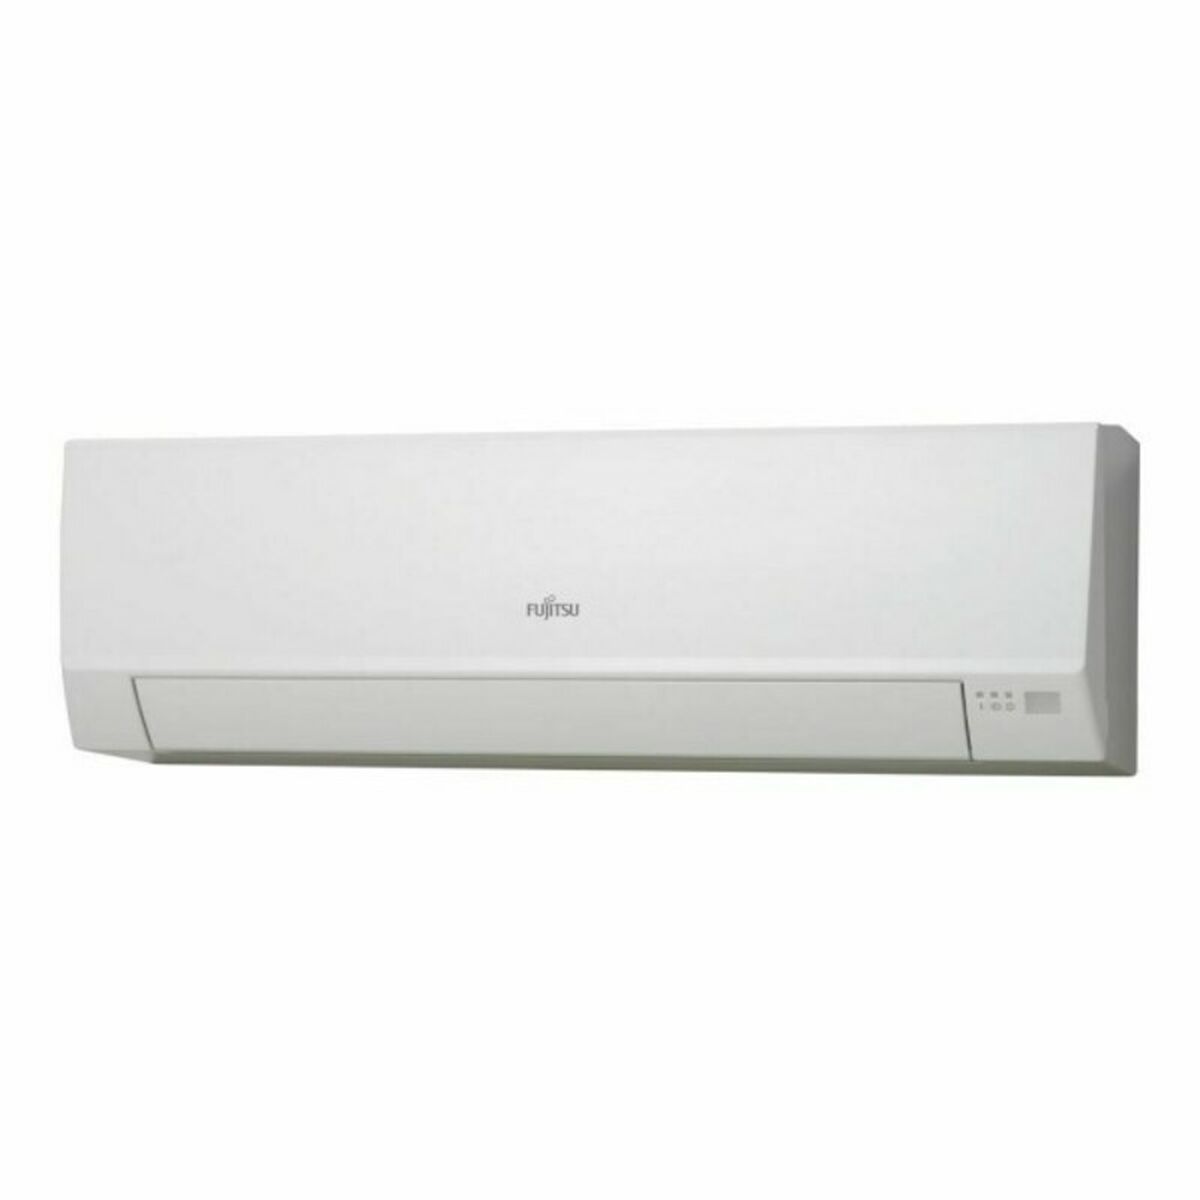 Airconditioner Fujitsu ASY71UIKL Split Inverter A++/A+ 4472 kcal/h Wit